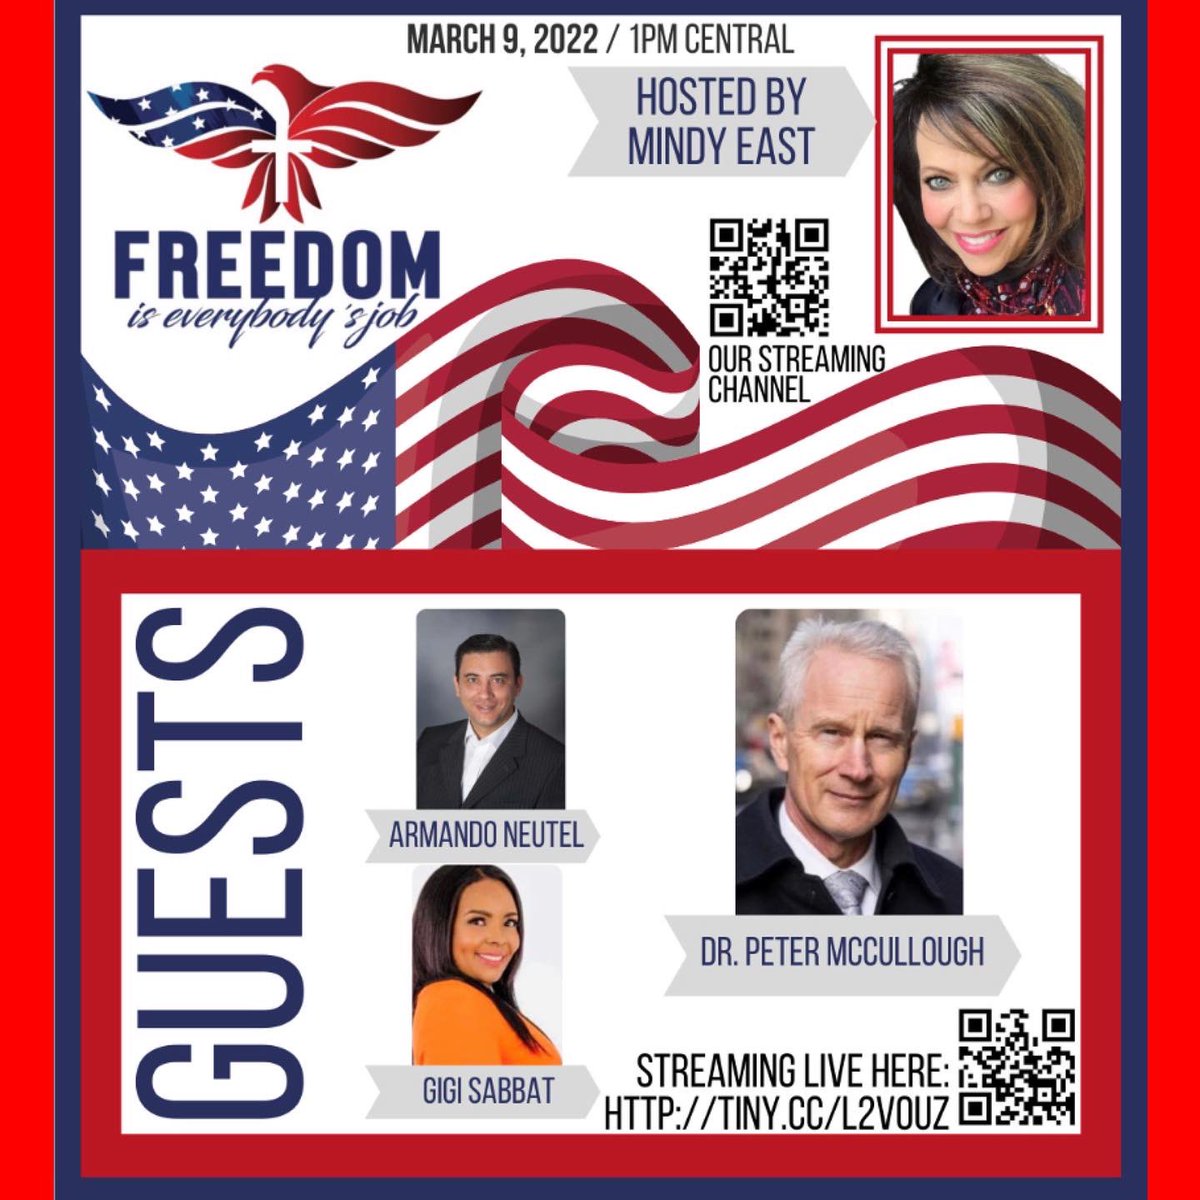 I am so excited. This week on Baron Ridge Speakers Agency CEO and Founder Mindy East show “Freedom is Everyone’s Job”, Jim Price is joining us on March 4, 2022 2PM Central and then next week Peter MCCullough. MD (Medical Doctor) will join us on March 9, 2022 1PM Central.